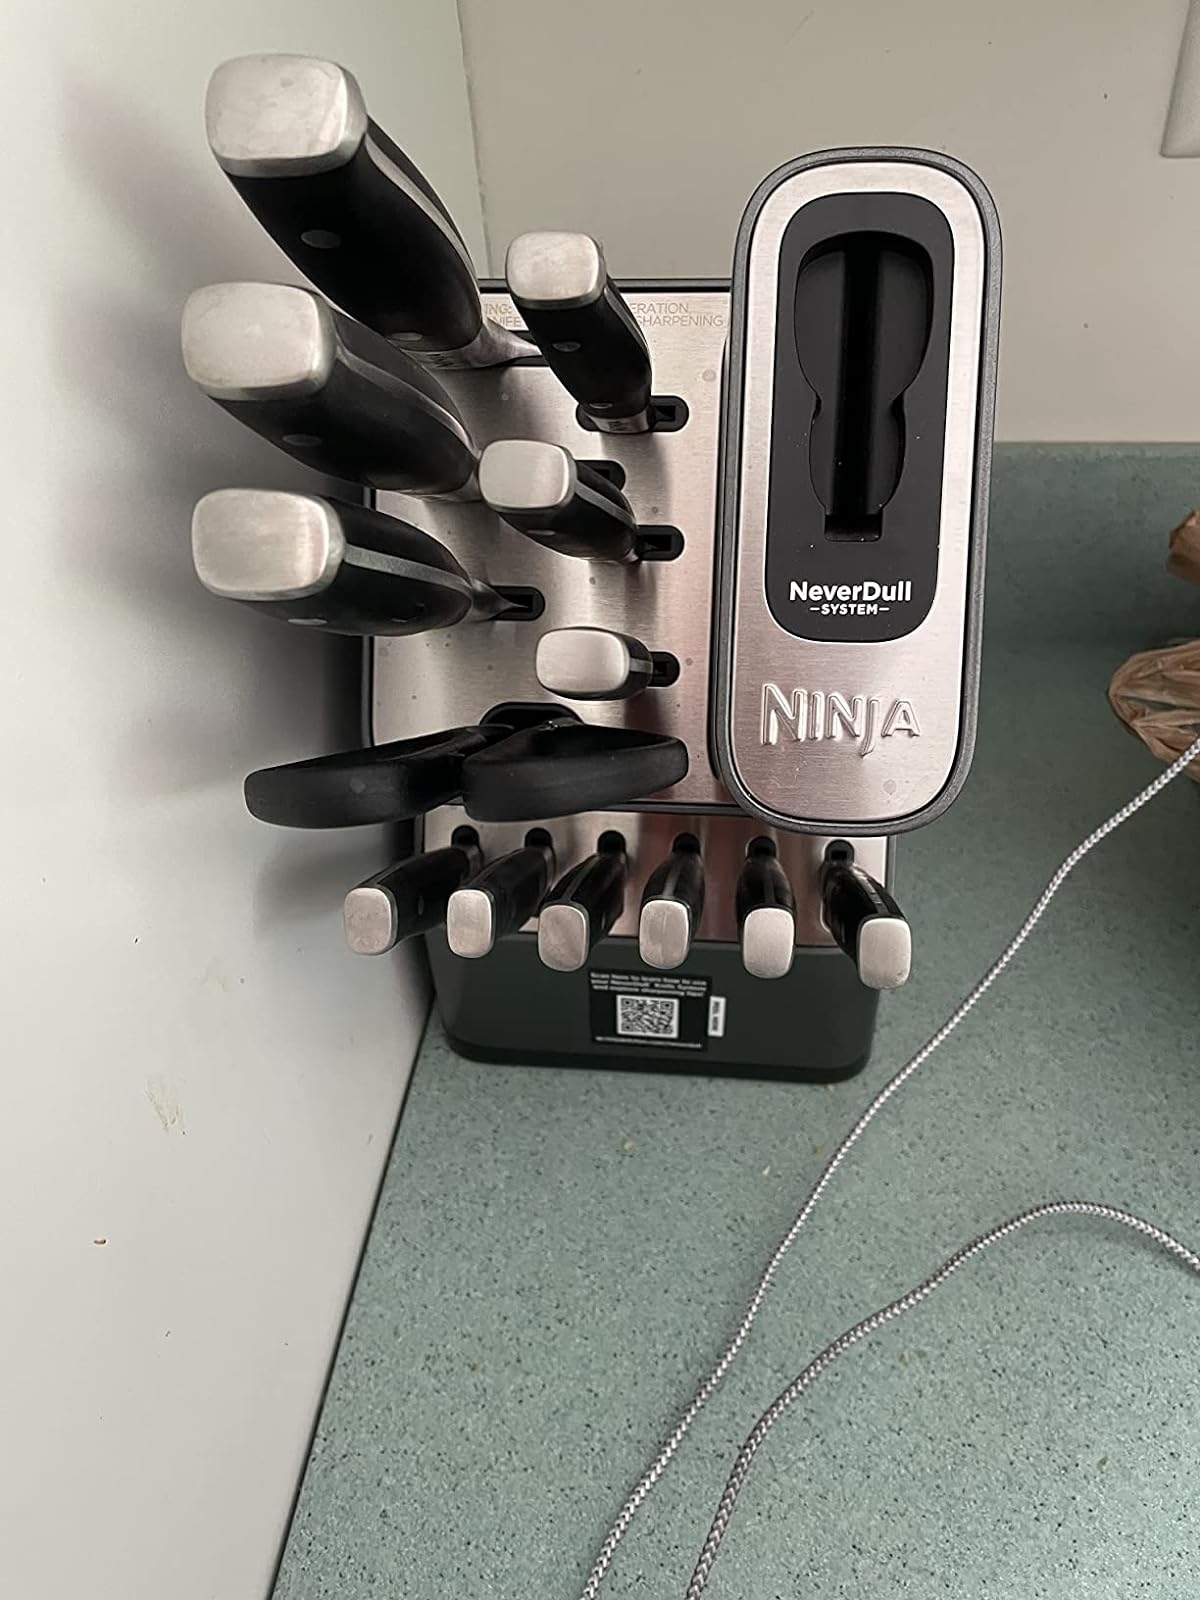 Are the Ninja Never Dull Knives worth it? Well, after 4 months of ownership  I can tell you the Ninja Foodi NeverDull Knife Set is the BEST knife set  I've